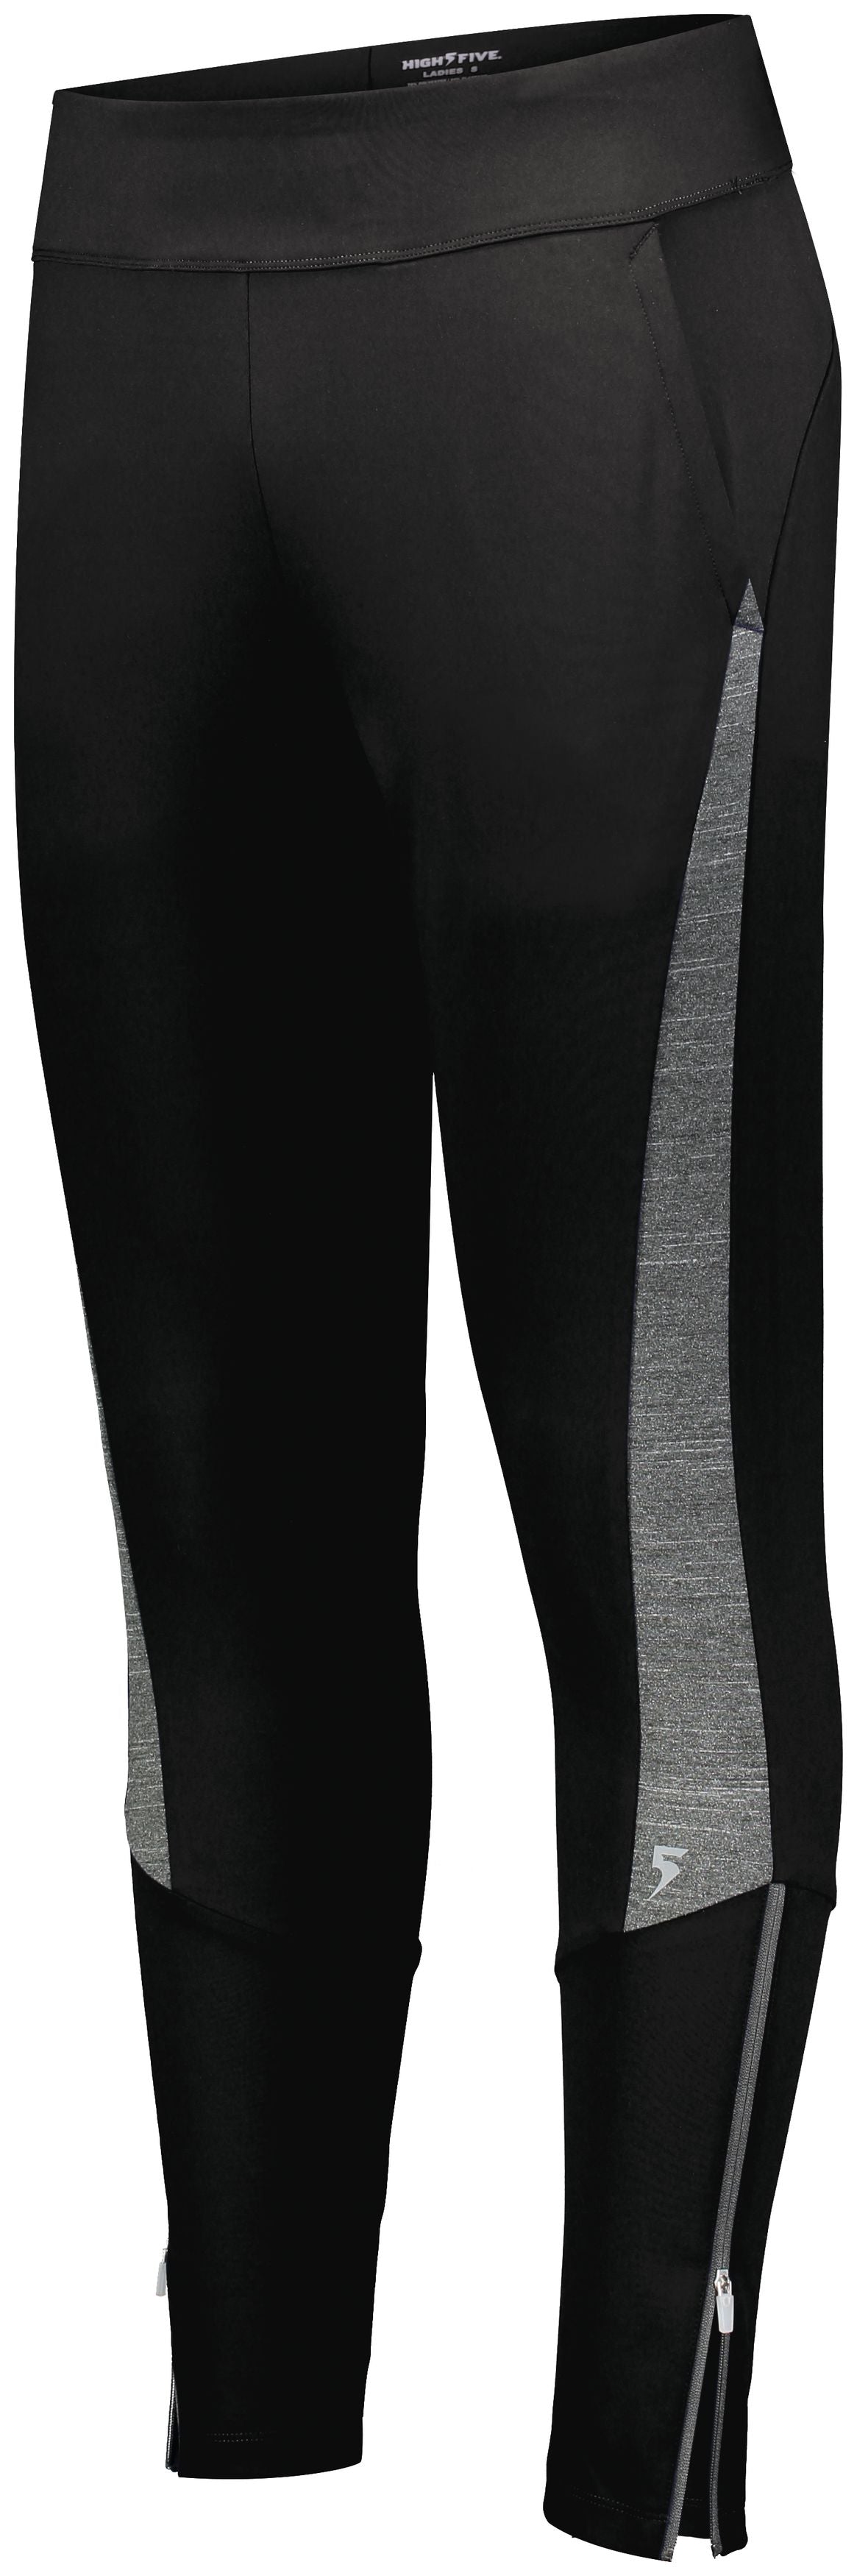 High 5 Ladies Free Form Pant in Black/Carbon Heather  -Part of the Ladies, Ladies-Pants, Pants, High5-Products product lines at KanaleyCreations.com